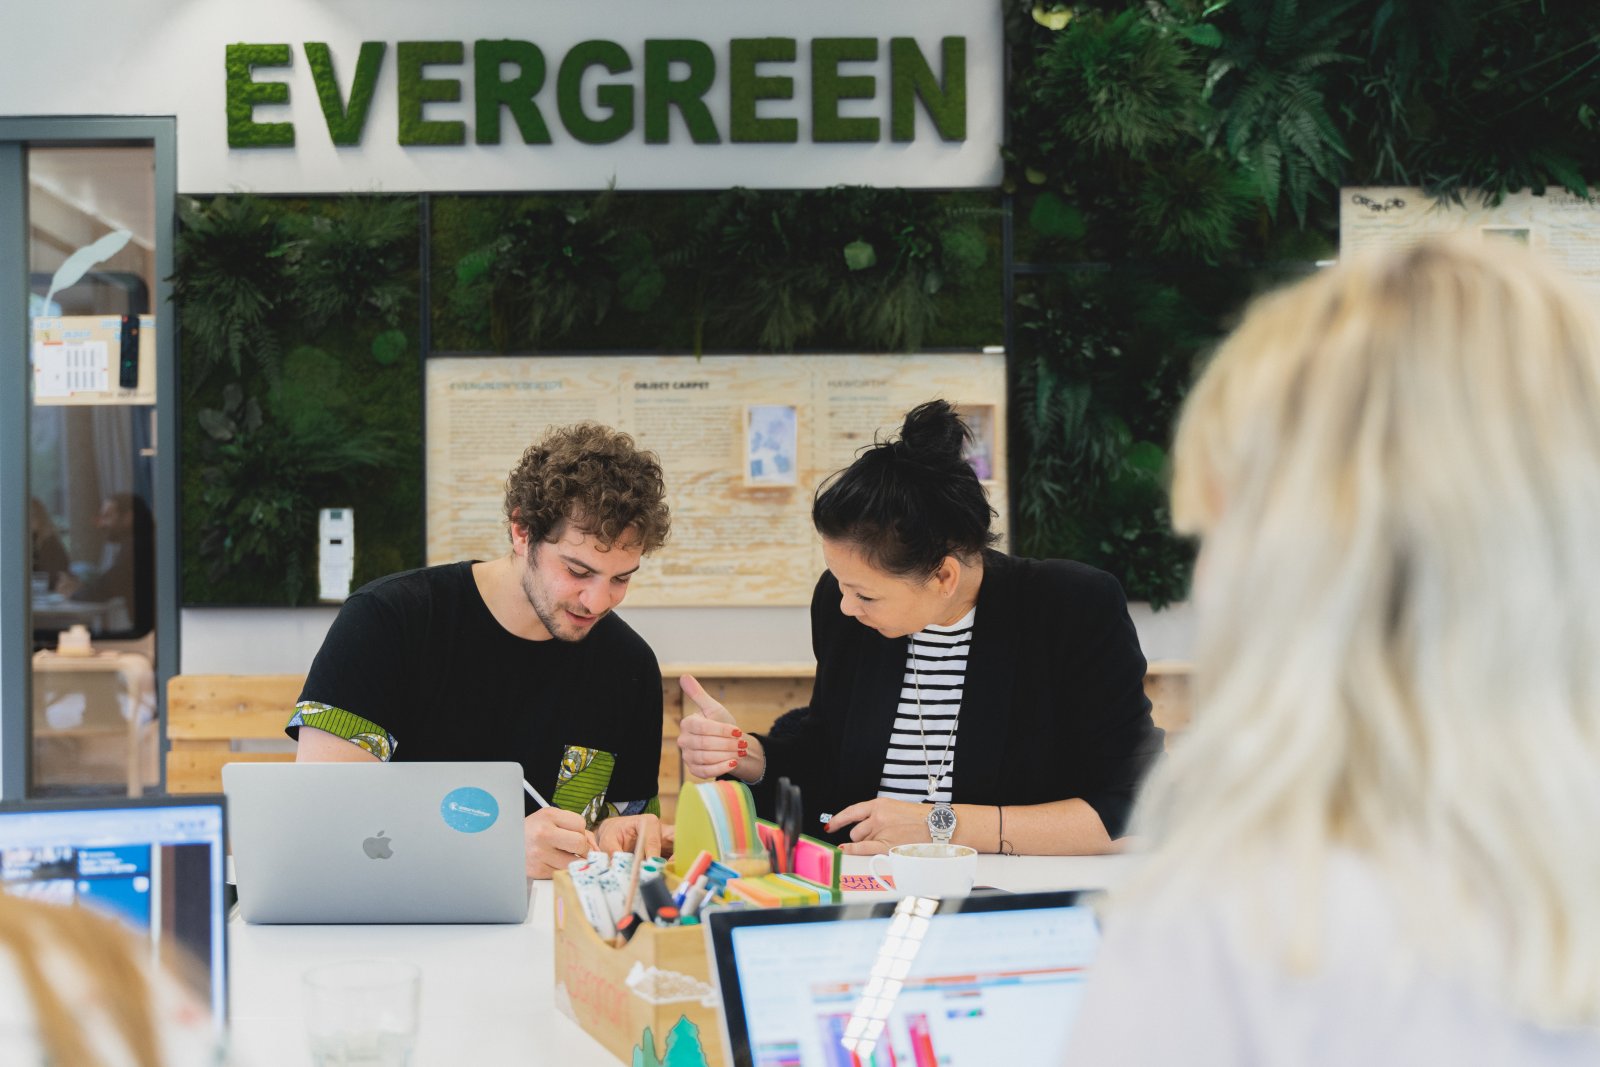 The Evergreen Concept - a sustainable new design approach!